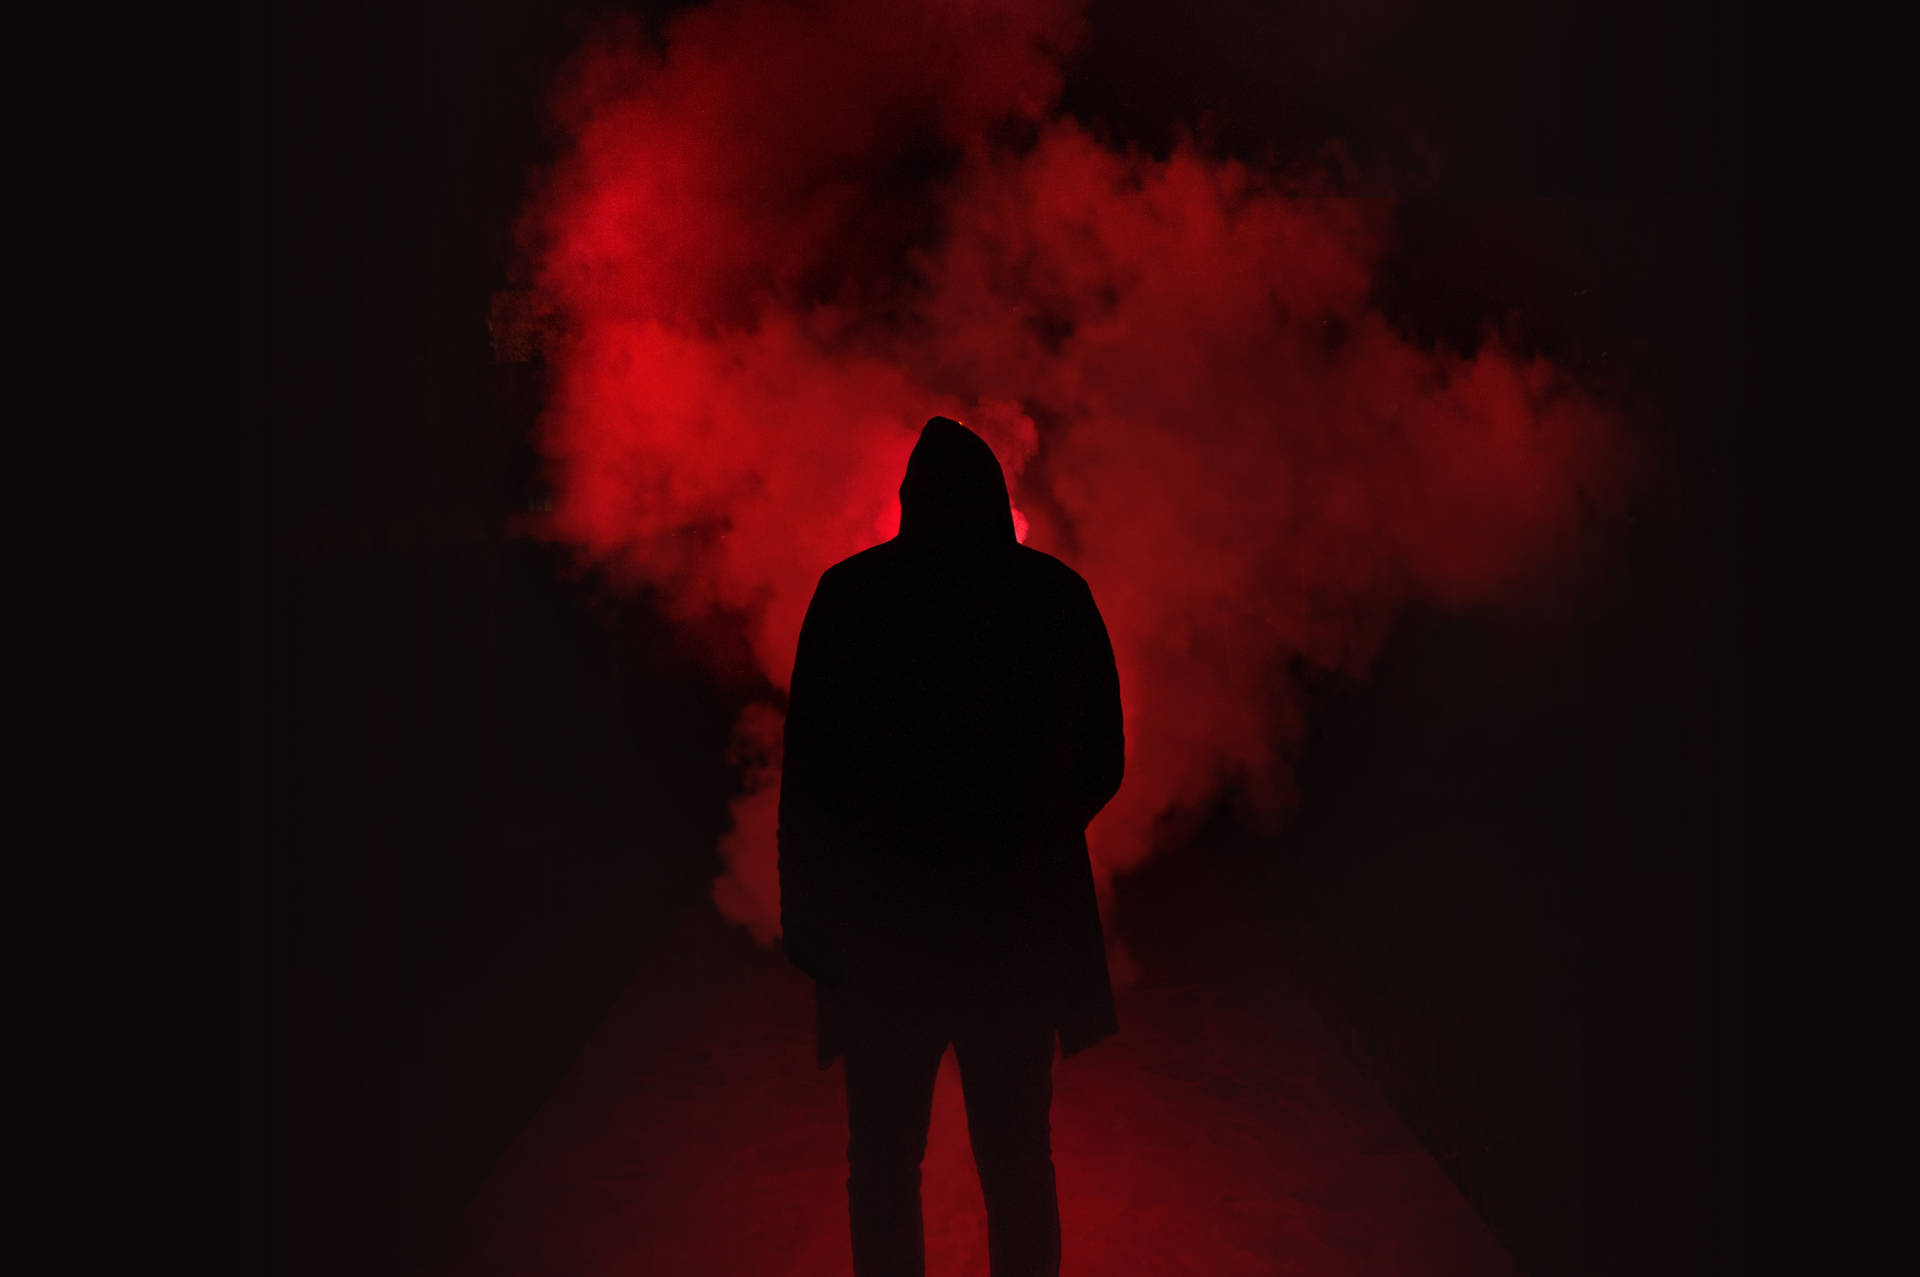 Red Hood Silhouette In Dark Red And Black Wallpaper